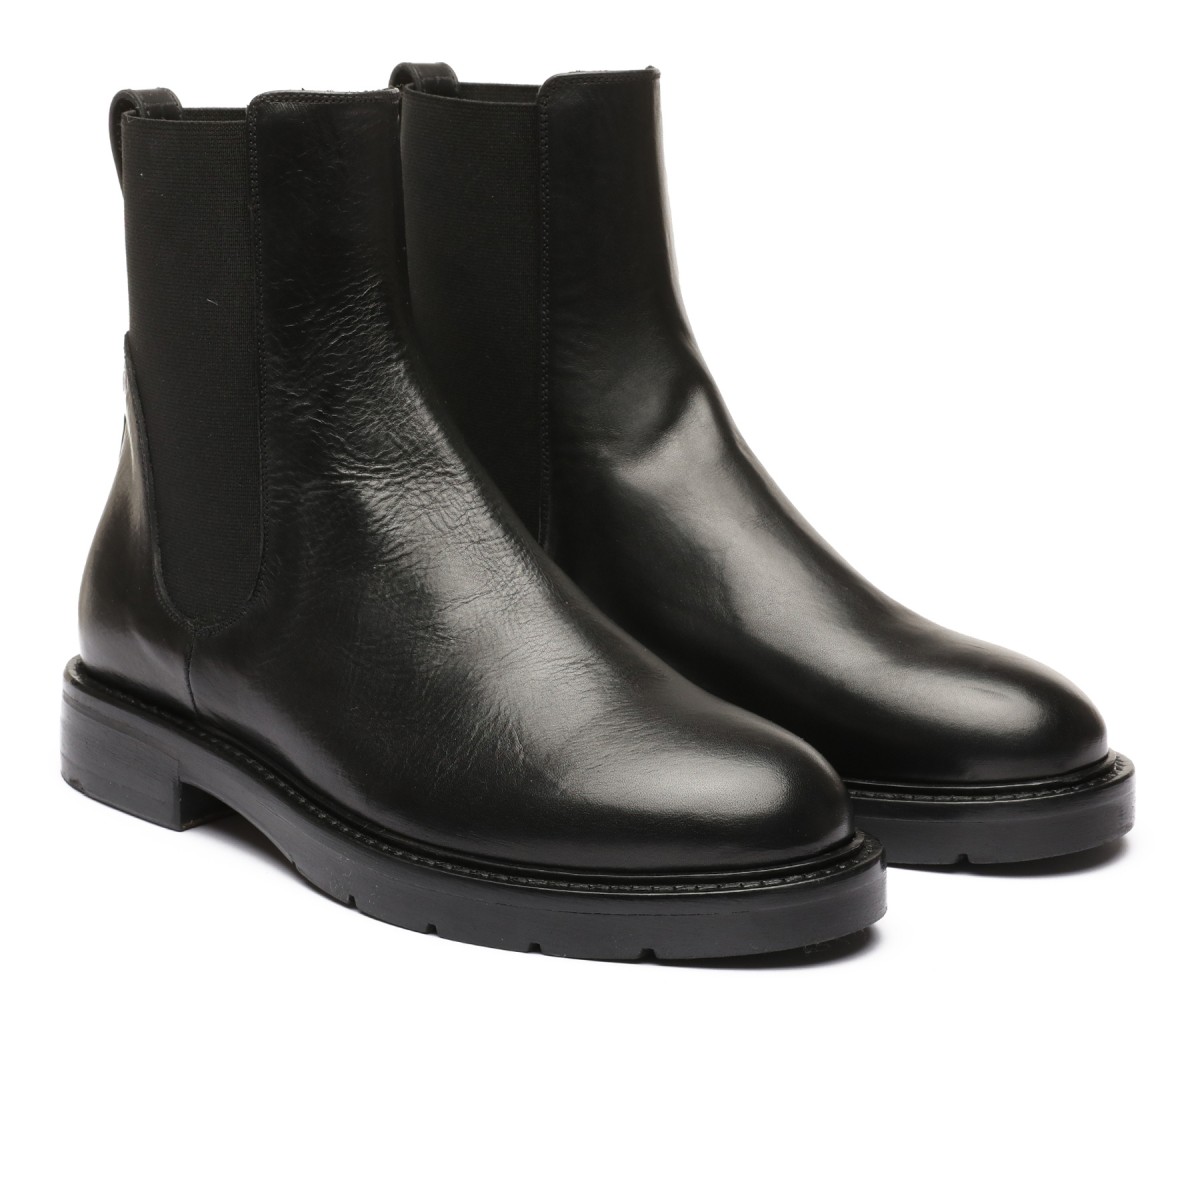 Negri black leather ankle boots